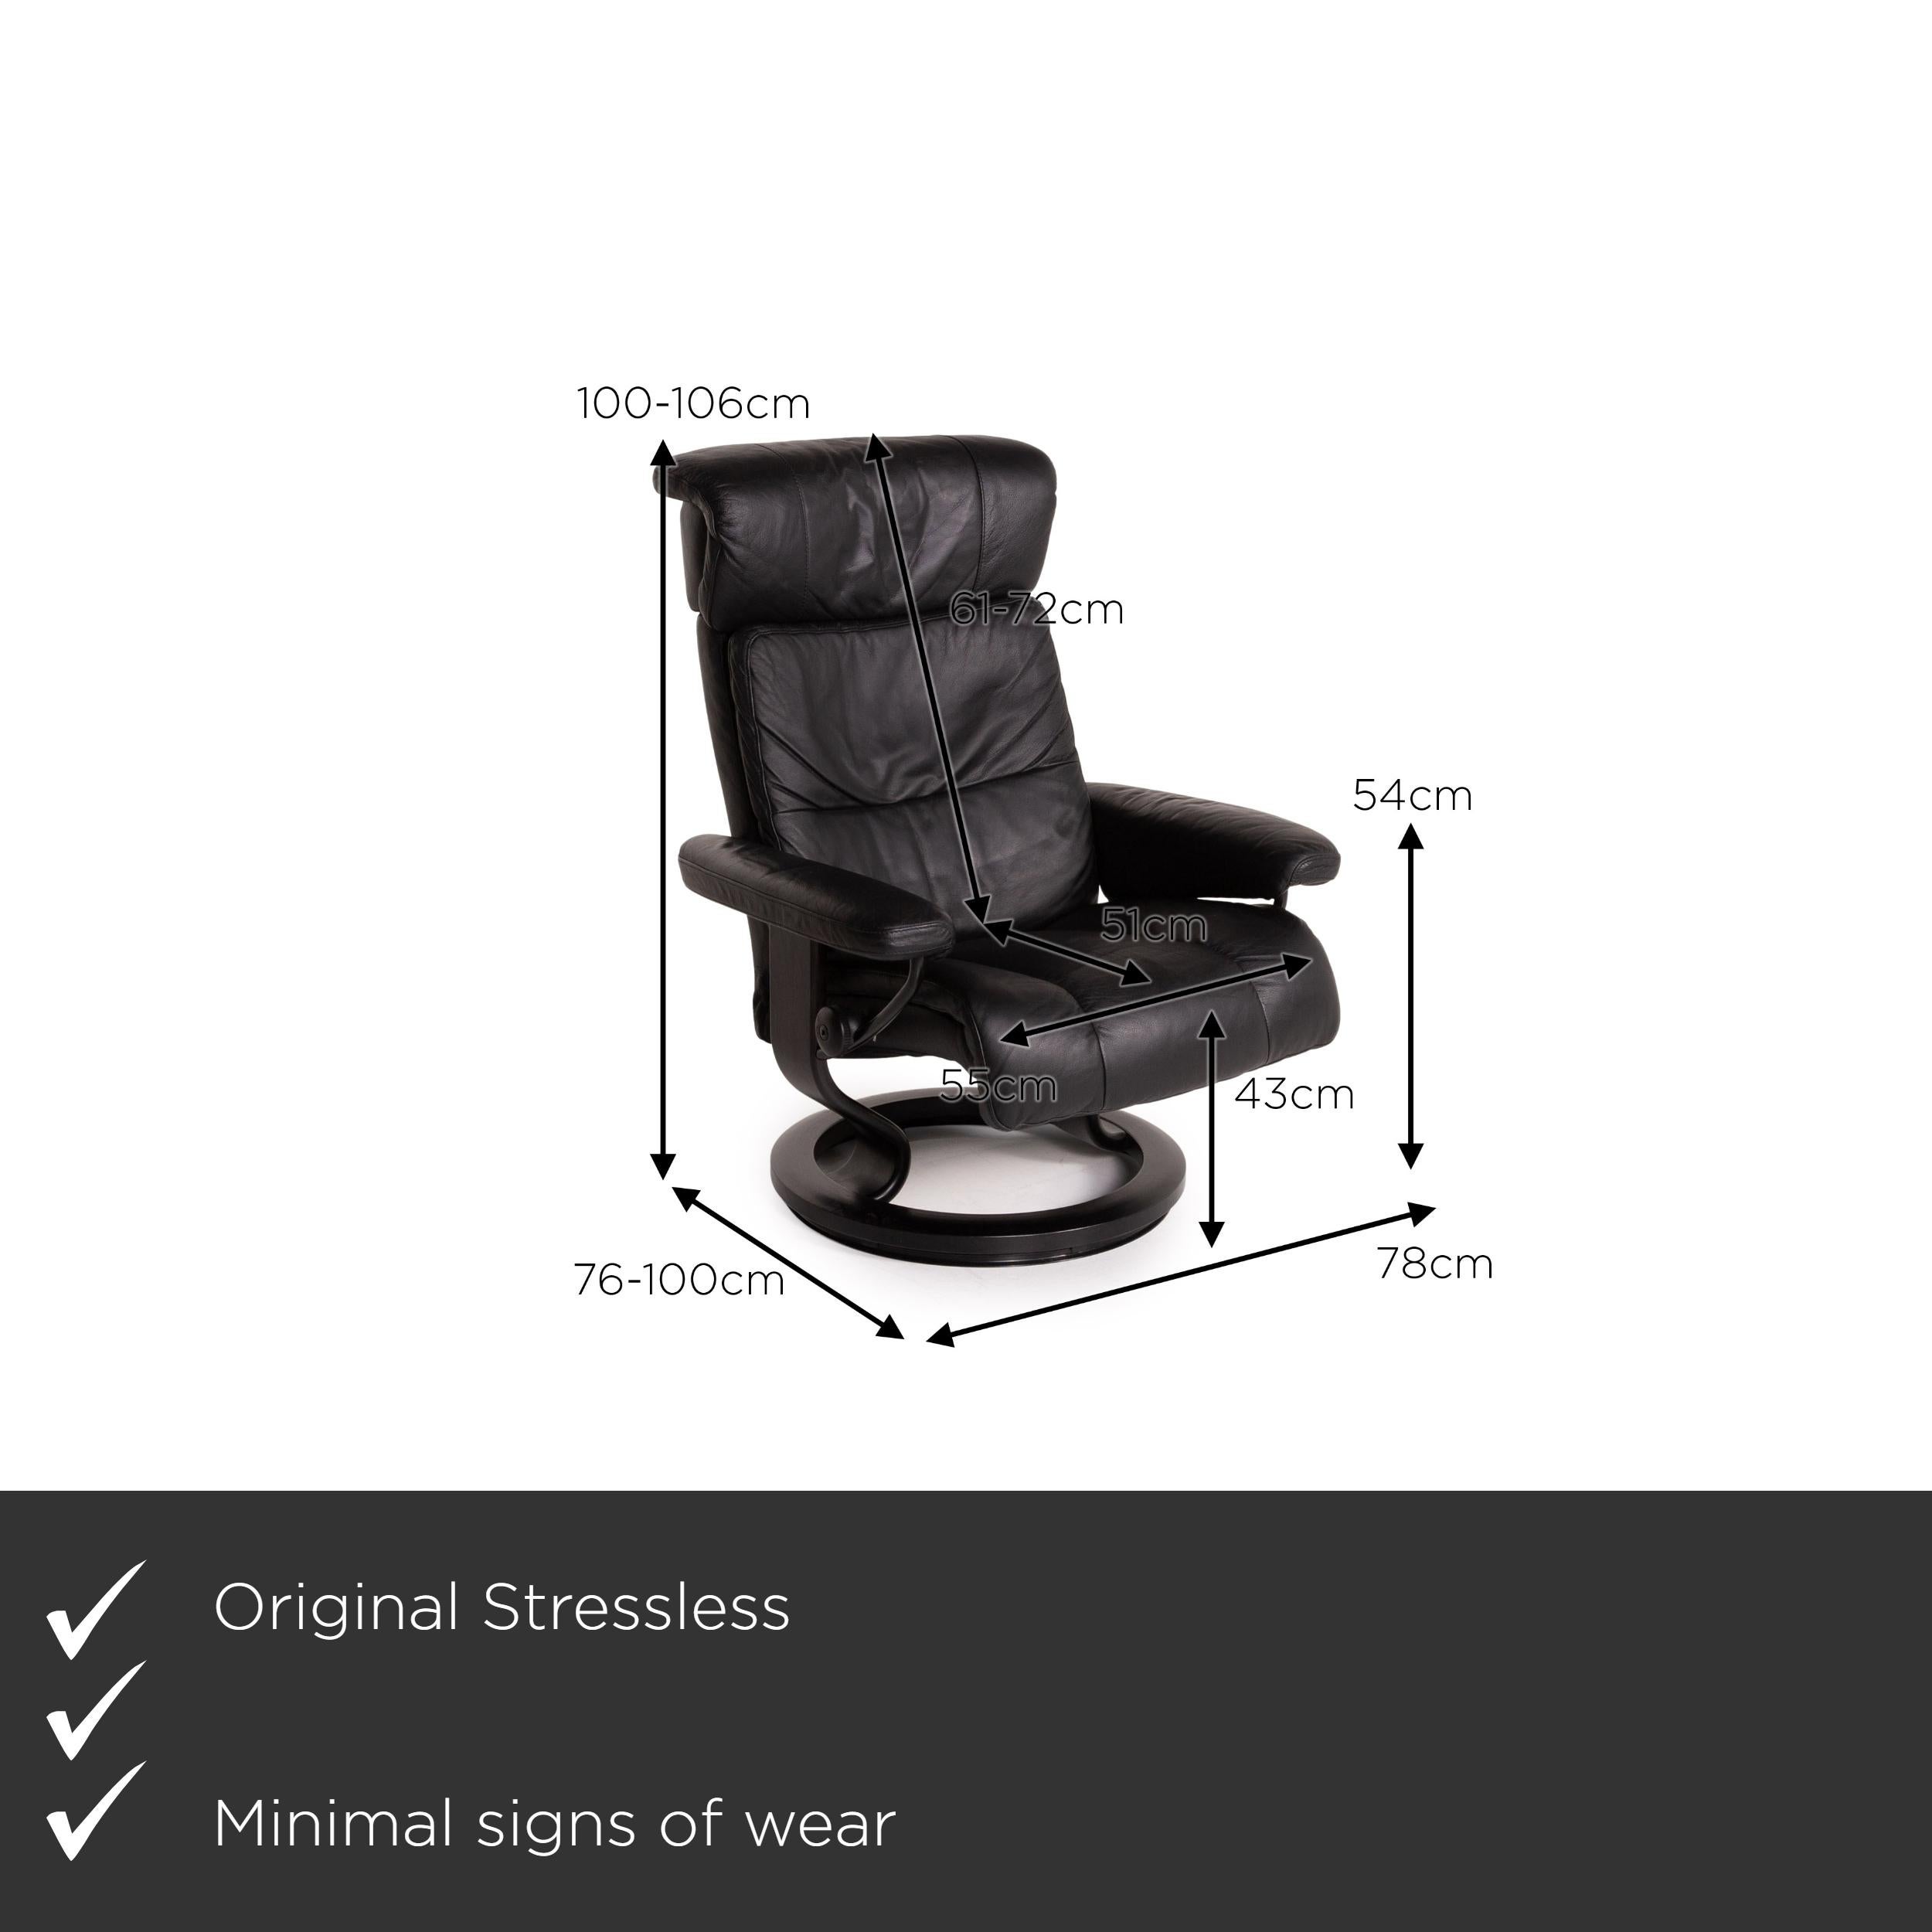 We present to you a stressless Memphis leather armchair size M incl. Black stool function relax.
 
 

 Product measurements in centimeters:
 

 depth: 76
 width: 78
 height: 100
 seat height: 43
 rest height: 54
 seat depth: 51
 seat